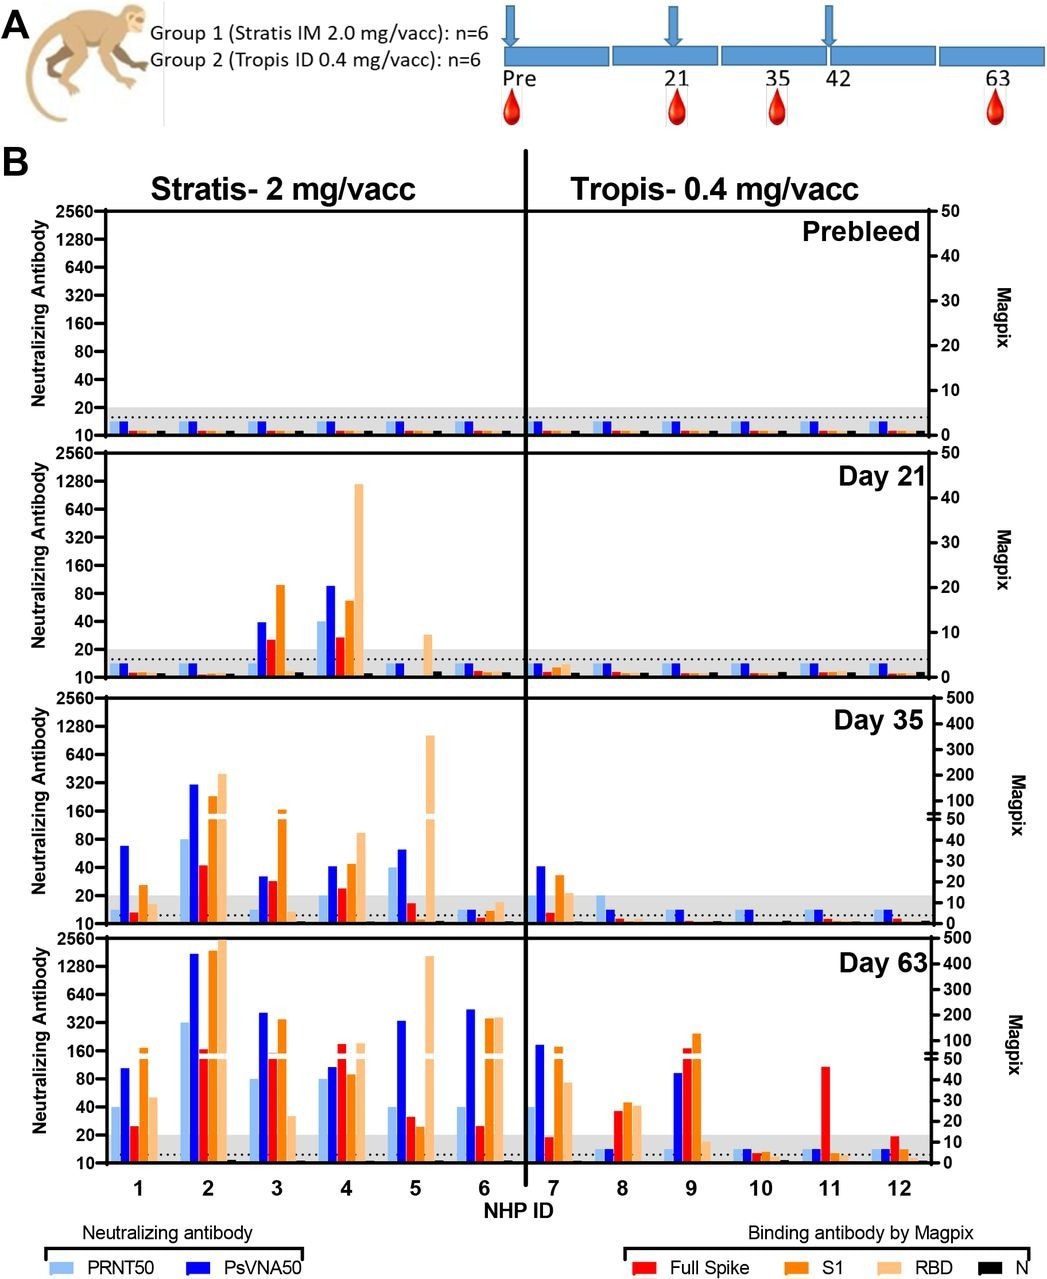 Neutralizing and binding antibody responses. PRNT50, PsVNA50, and Magpix titers from sera collected at various timepoints. A) Design. (blue arrows = vaccine dosing; red drops = blood collection time points). B) Neutralizing and binding antibody values at the indicated timepoints. Assay lower limits are shown as gray shaded area.